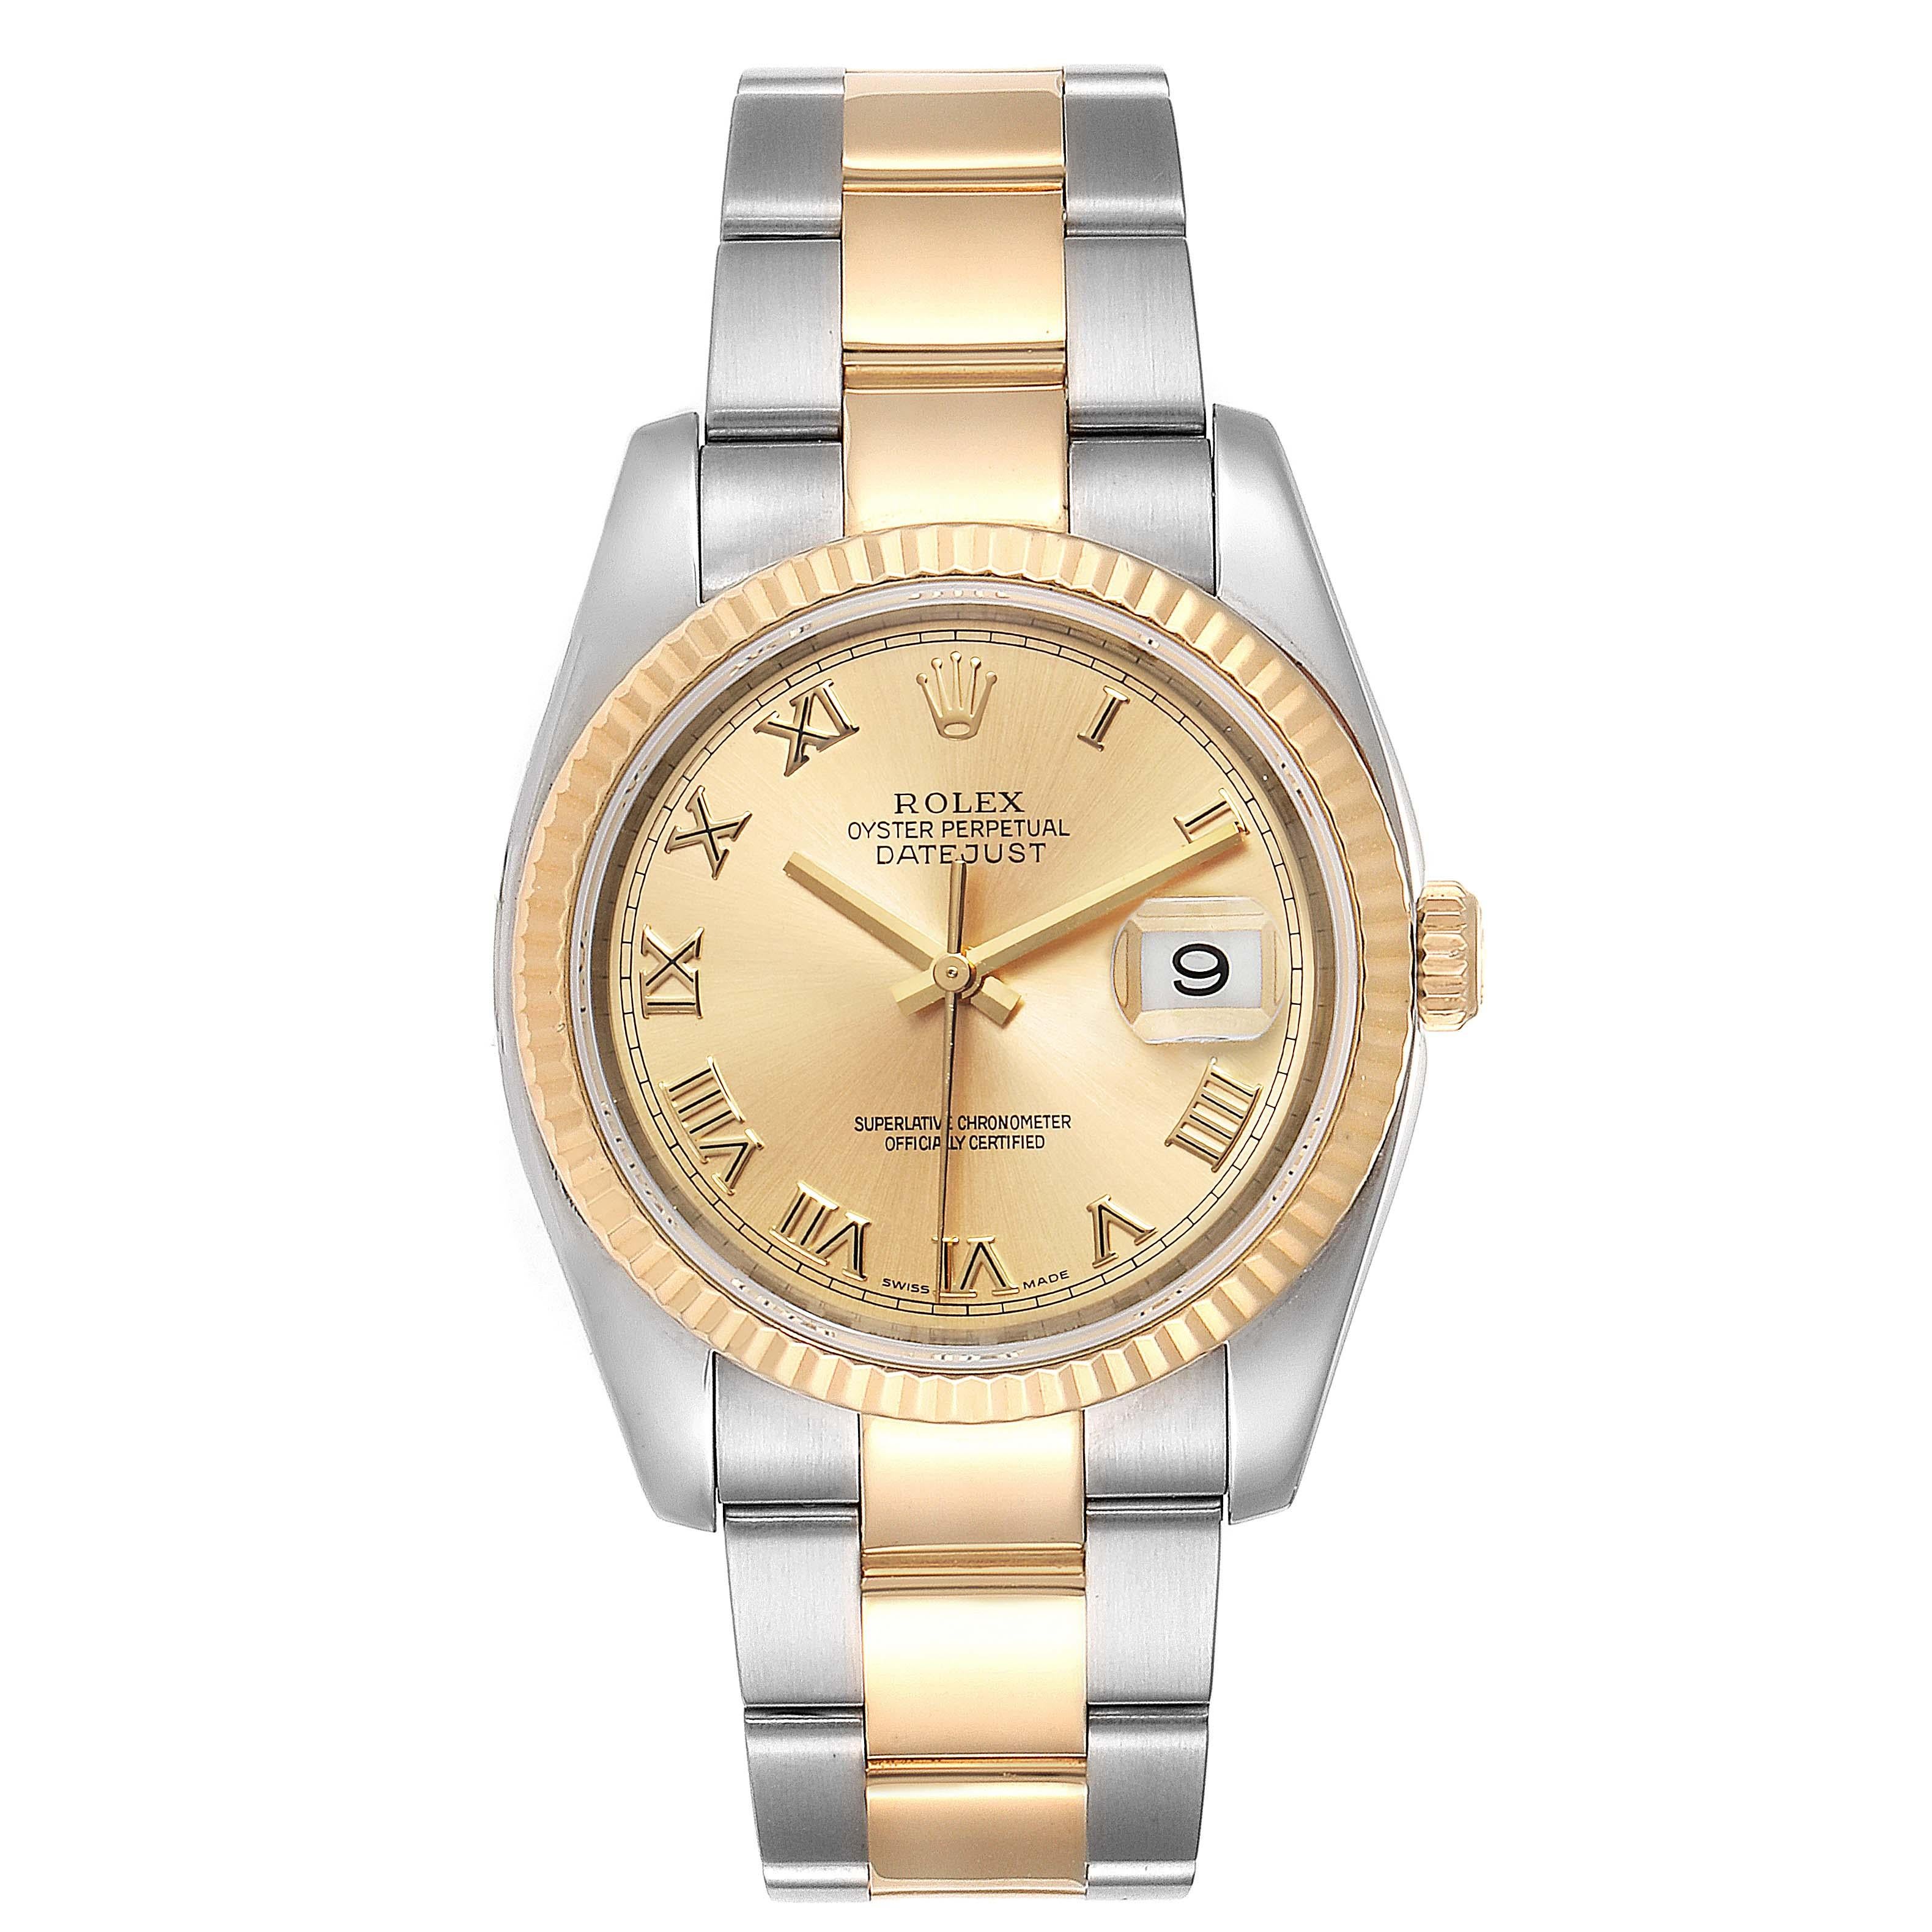 Rolex Datejust Steel Yellow Gold Oyster Bracelet Mens Watch 116233. Officially certified chronometer automatic self-winding movement. Stainless steel case 36.0 mm in diameter. Rolex logo on a crown. 18k yellow gold fluted bezel. Scratch resistant